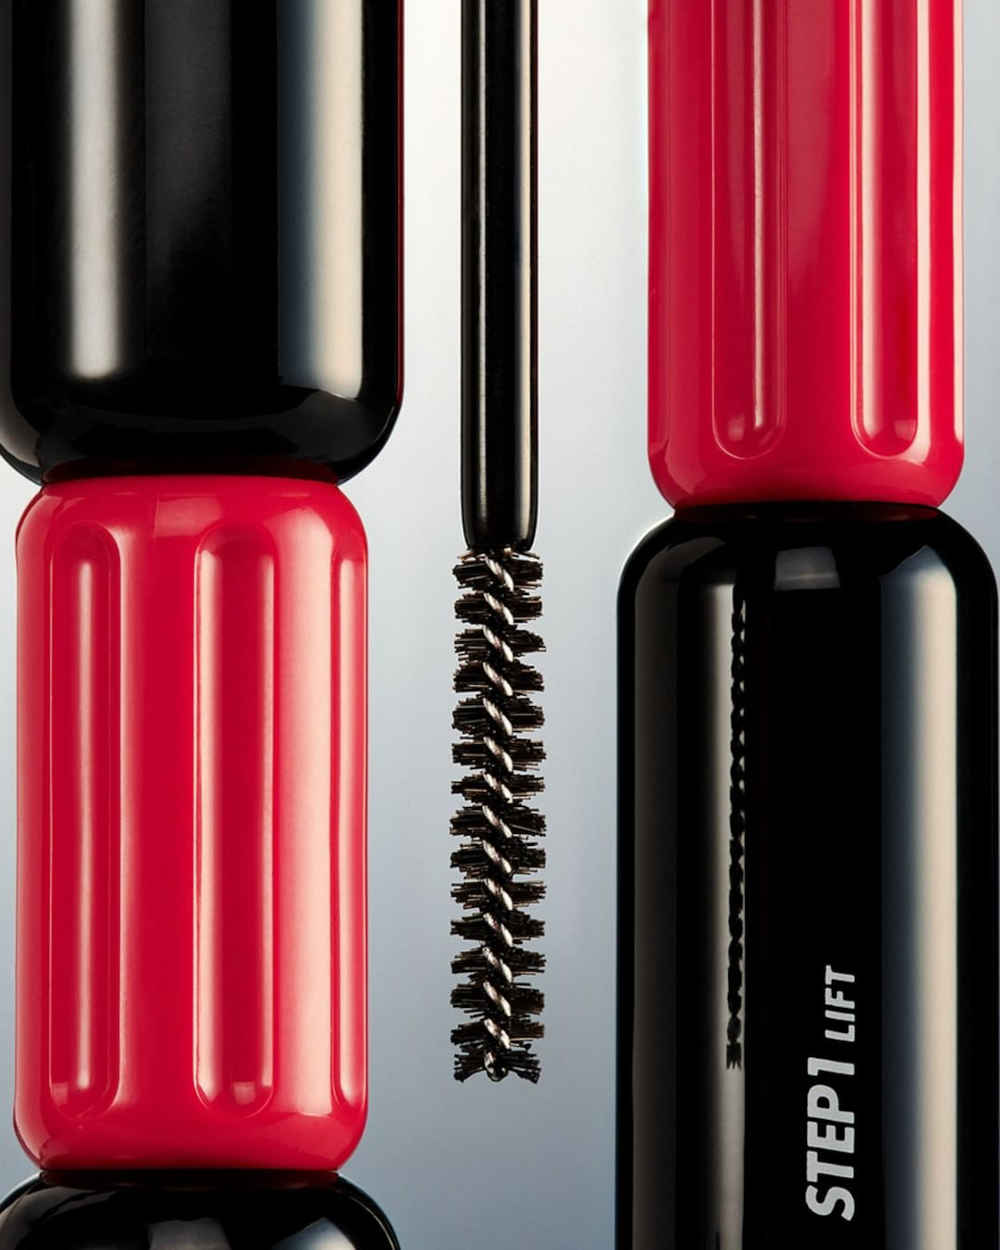 Make Up For Ever mascara The Professionall